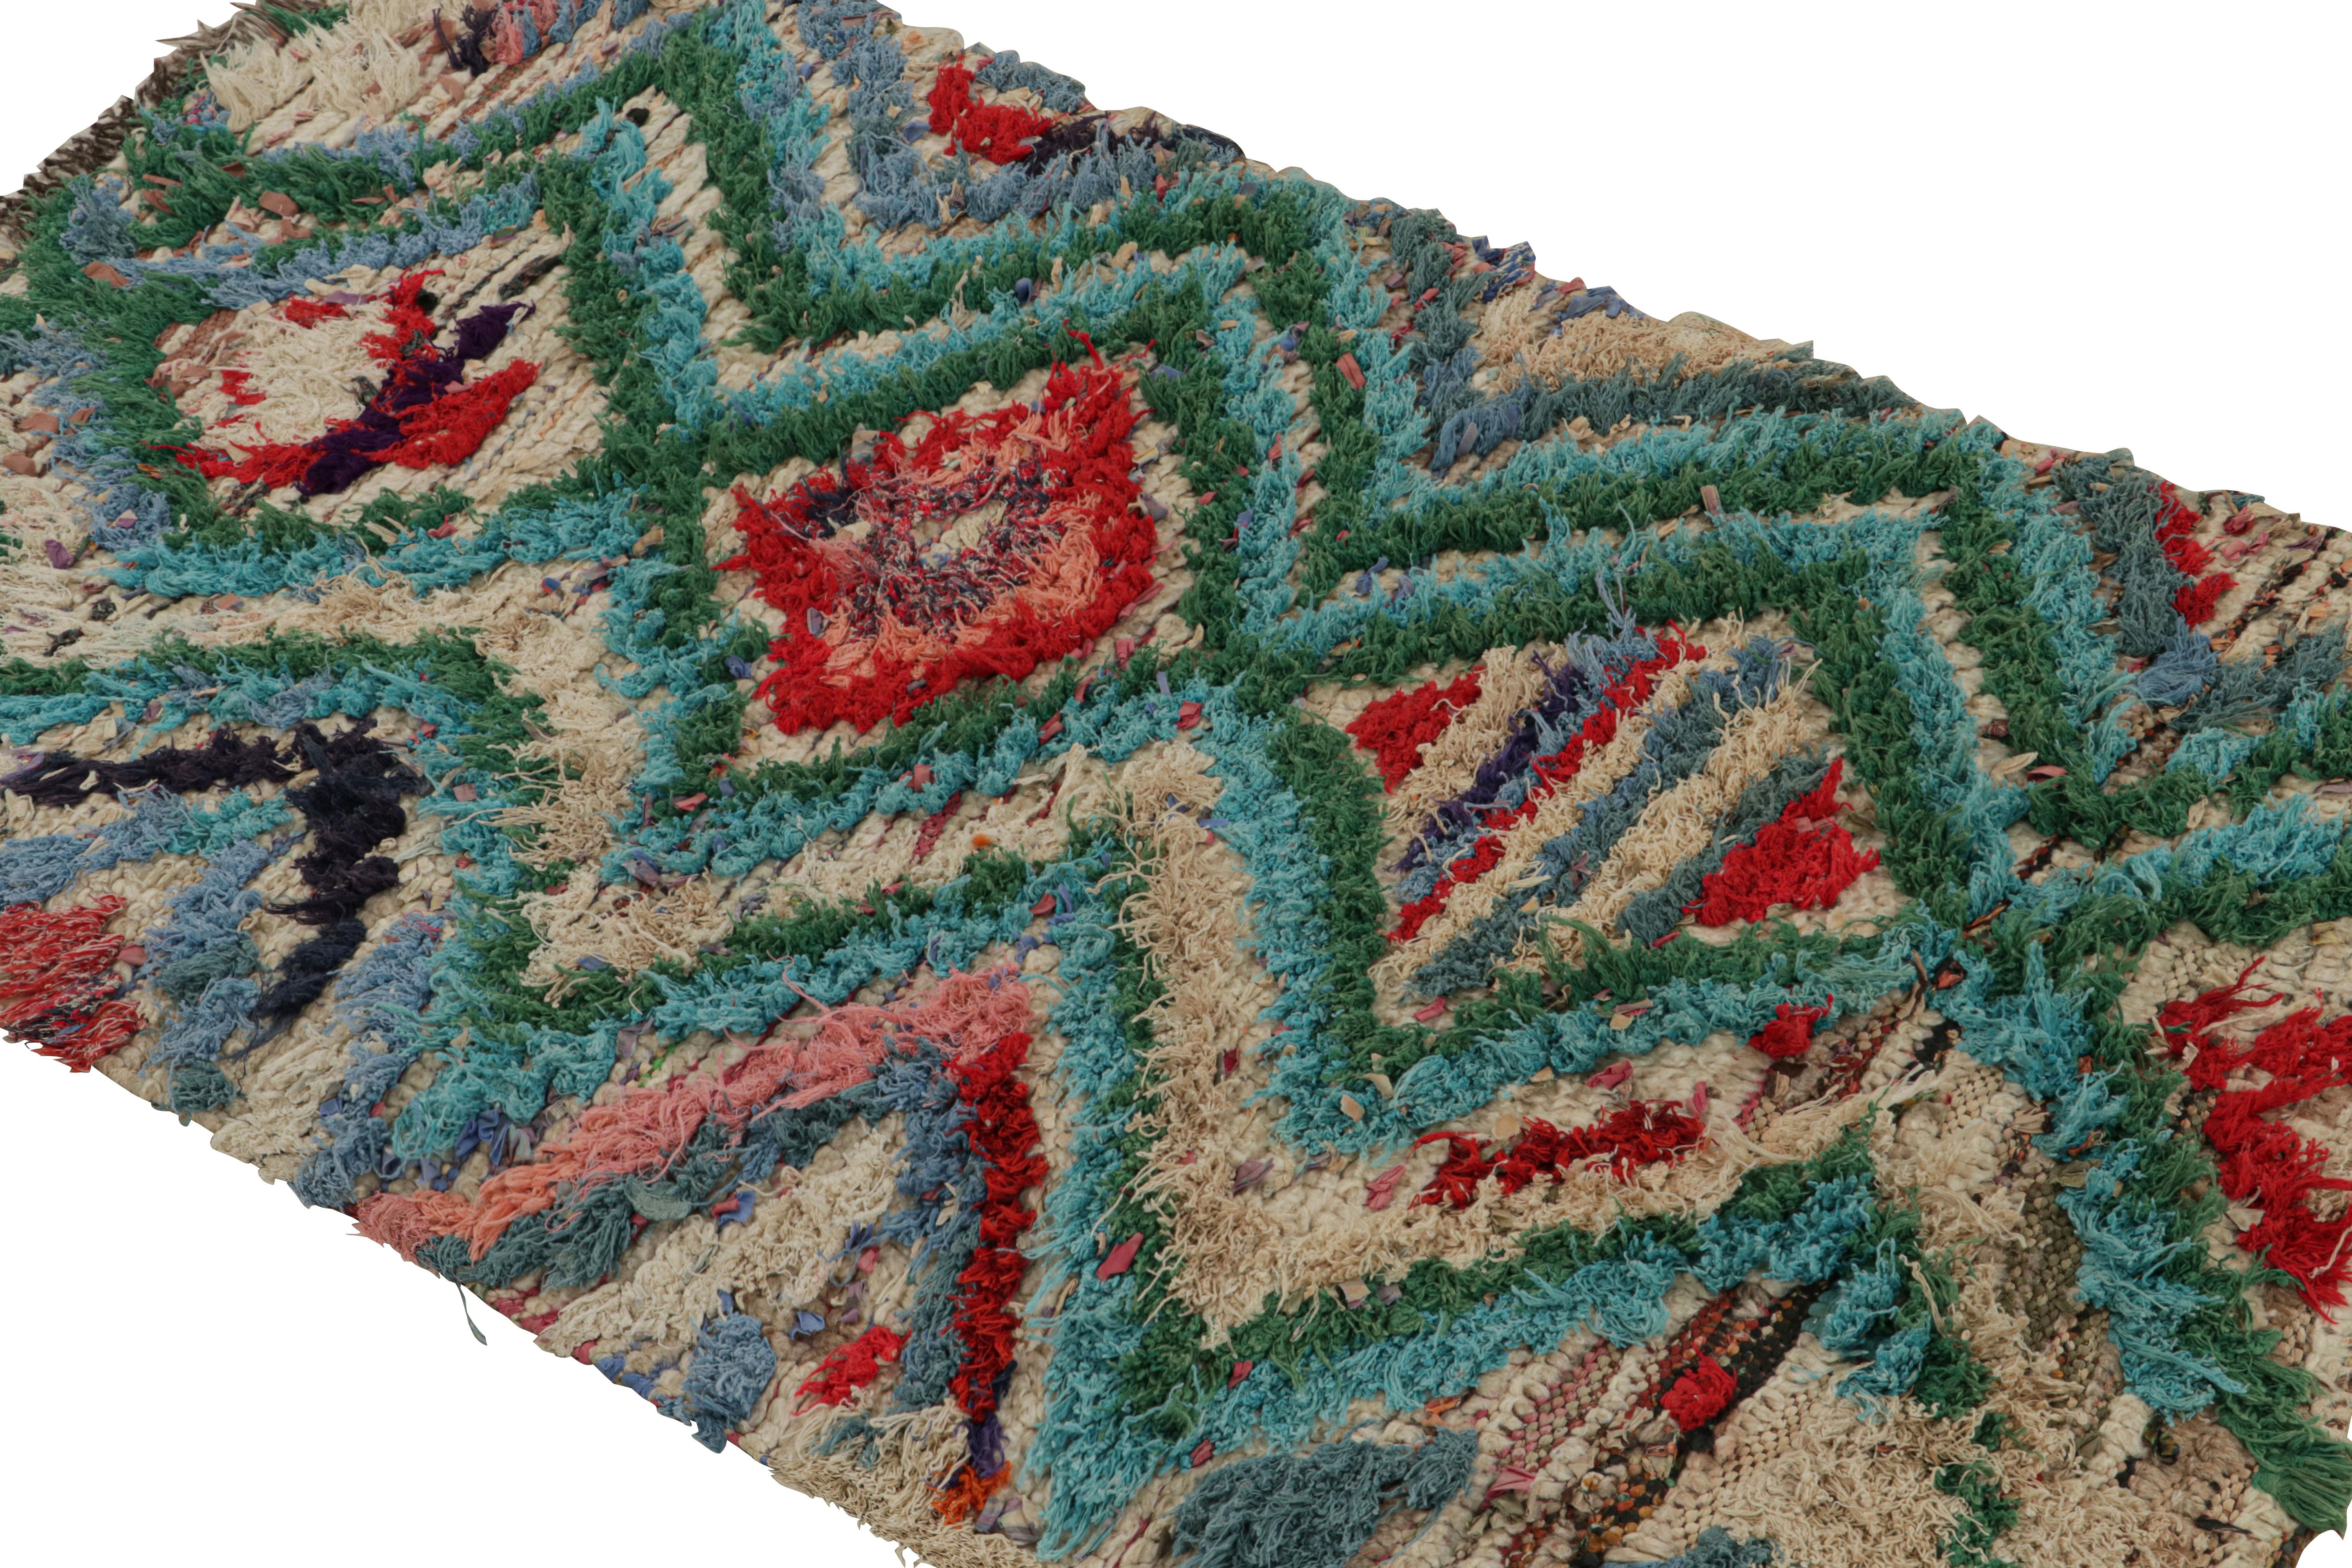 Hand-knotted in wool circa 1950-1960, this 3x7 vintage Moroccan runner rug with polychromatic chevron and diamond geometric patterns, hails from the Azilal tribe.  

On the Design: 

Connoisseurs will further admire this as an exemplary piece of the